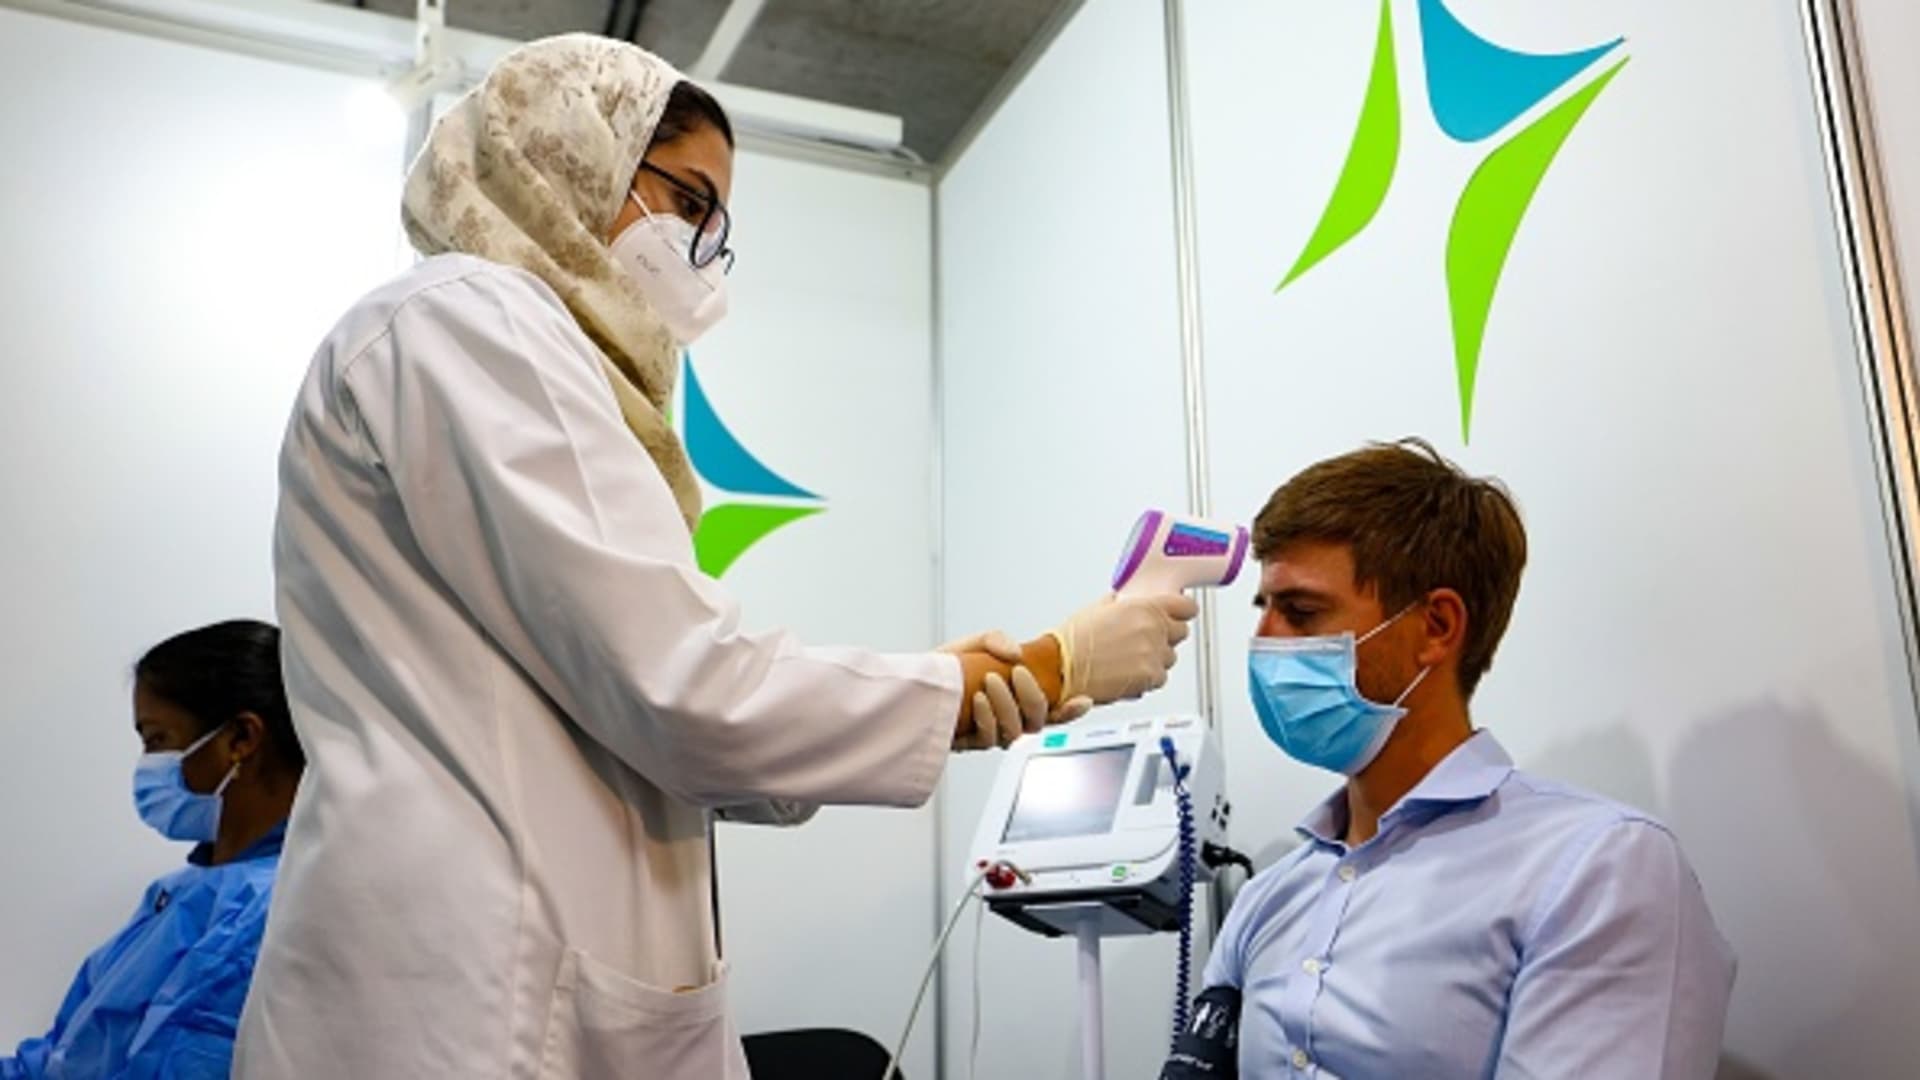 A health worker checks a man's temperature before receiving a dose of vaccine against the coronavirus at a vaccination center set up at the Dubai International Financial Center in the Gulf emirate of Dubai, on February 3, 2021. The United Arab Emirates has suffered a spike in cases after the holiday period.